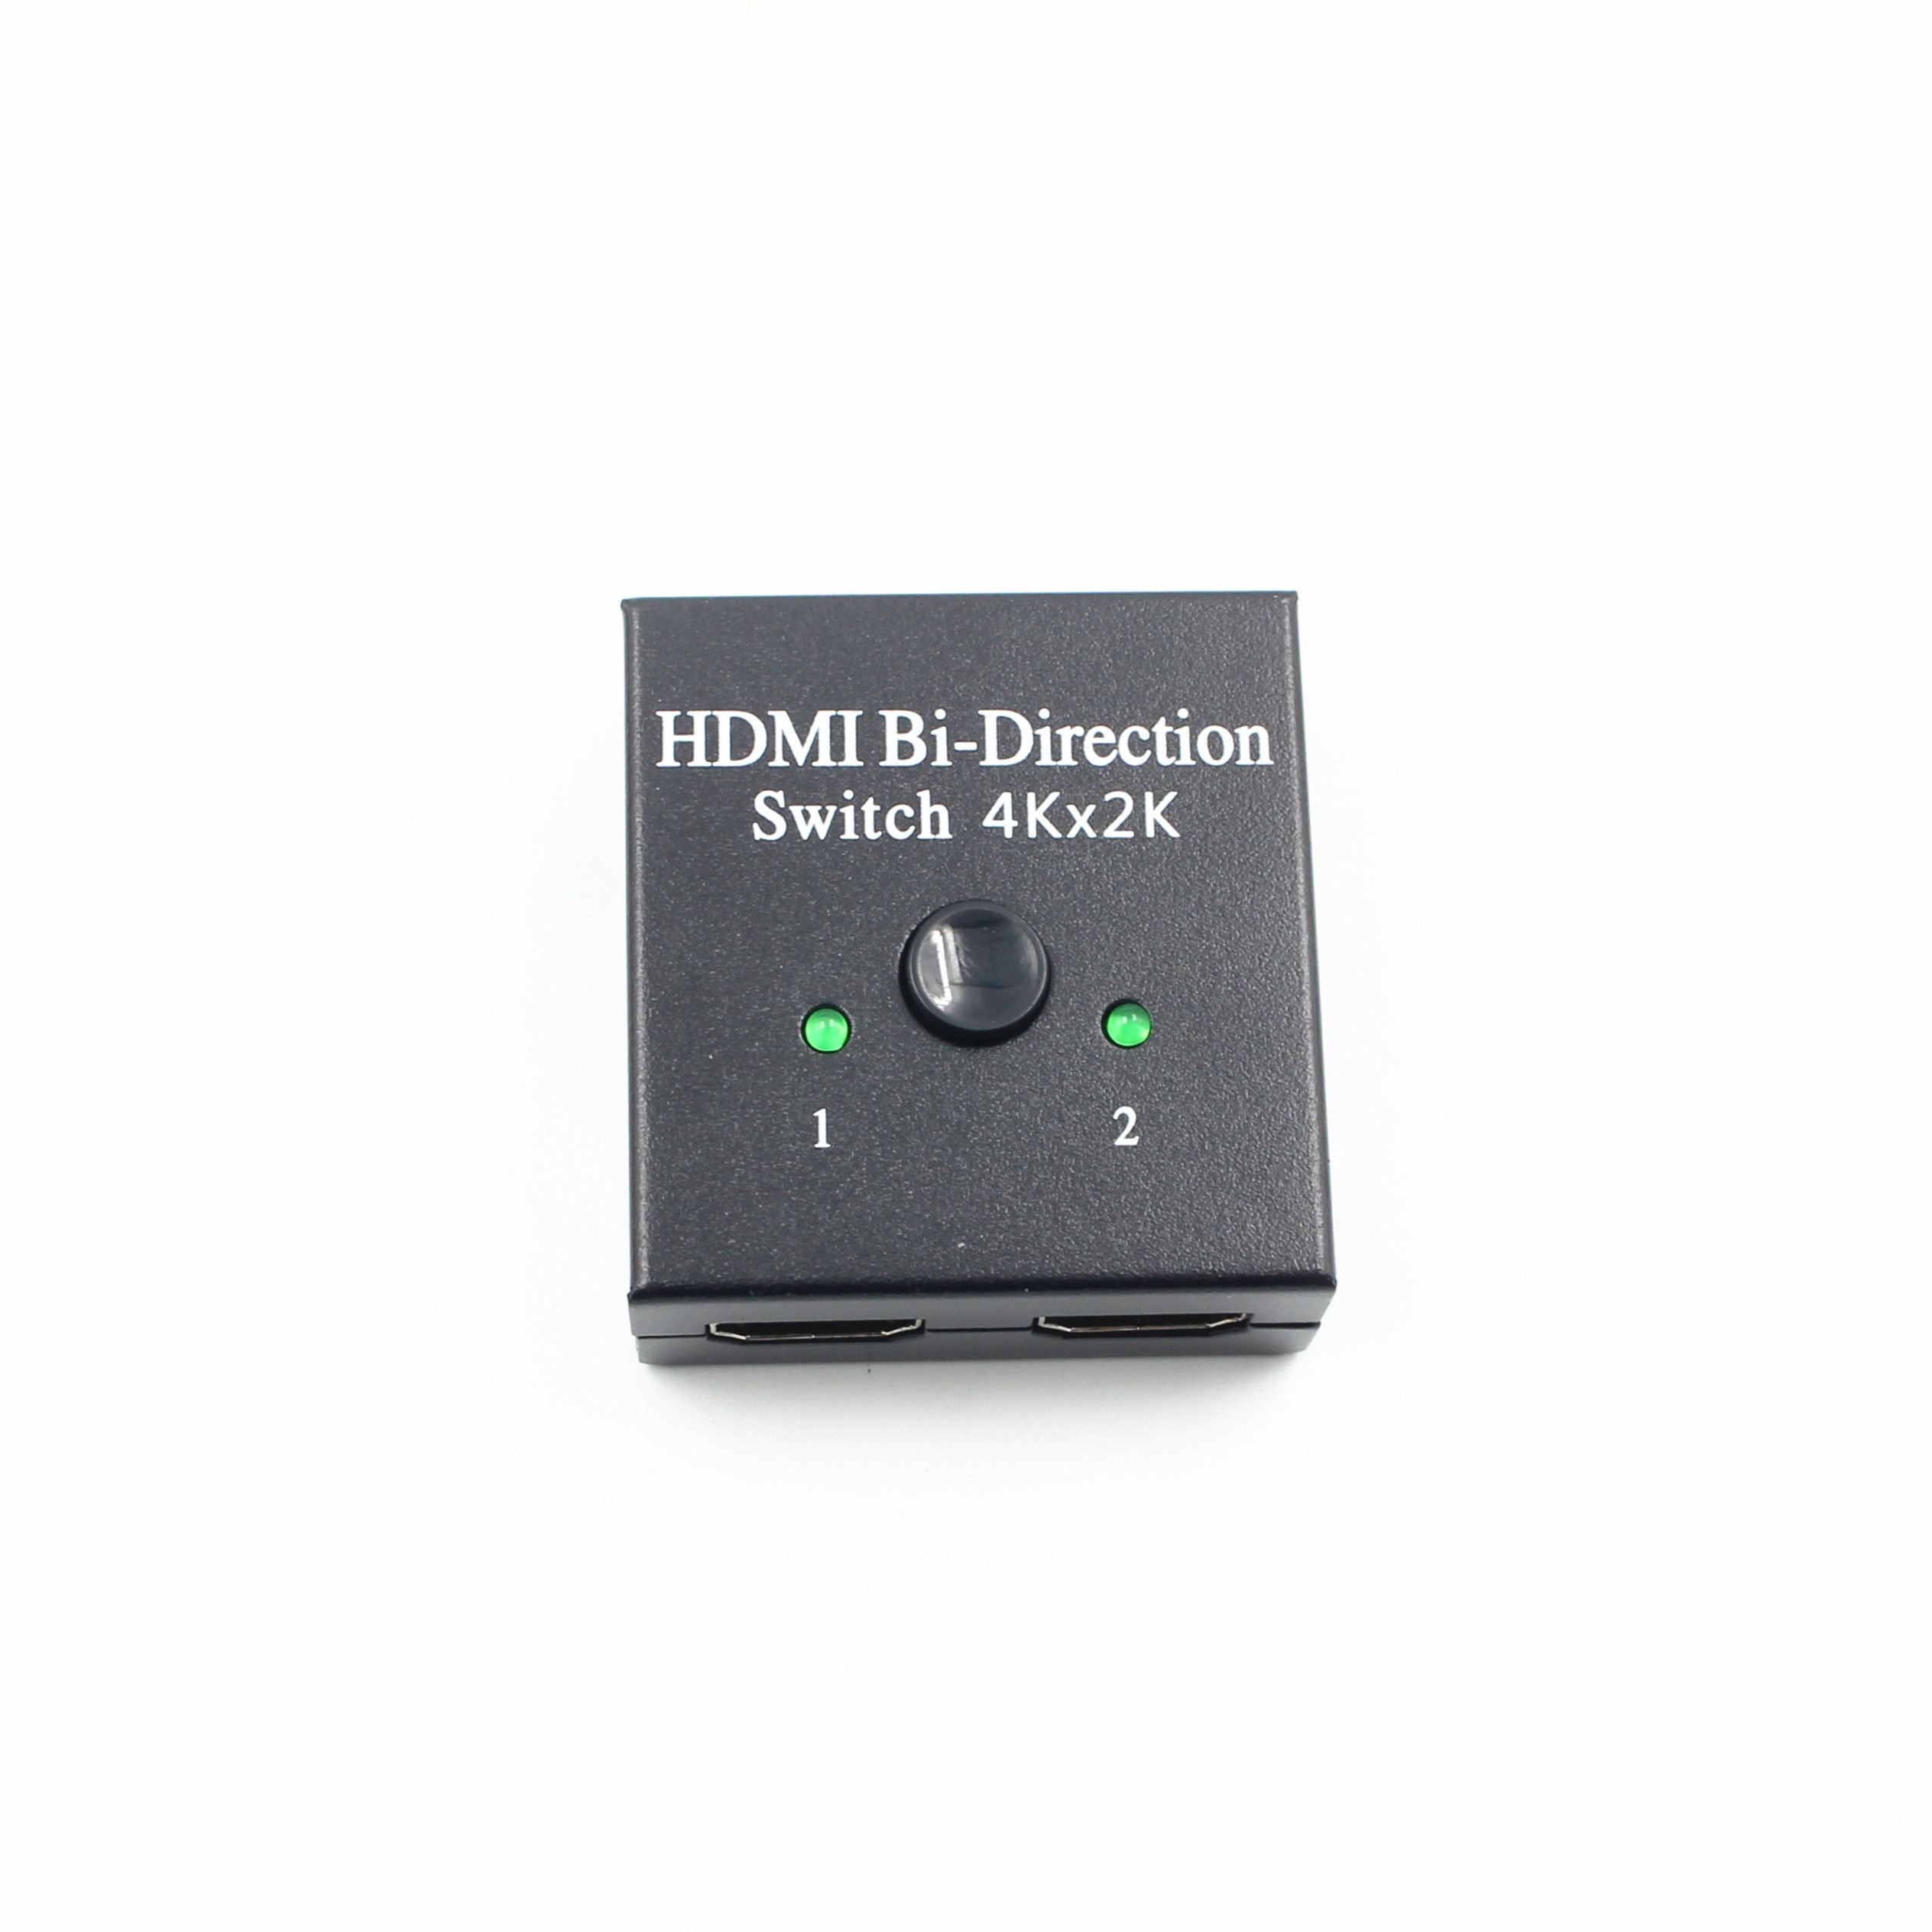 4Kx2K-Bi-Direction-Switch-HDMI-Two-way-Switcher-HD-2-In-1-Out-Converter-for-HDTV-TV-Box-Monitor-Proj-1763059